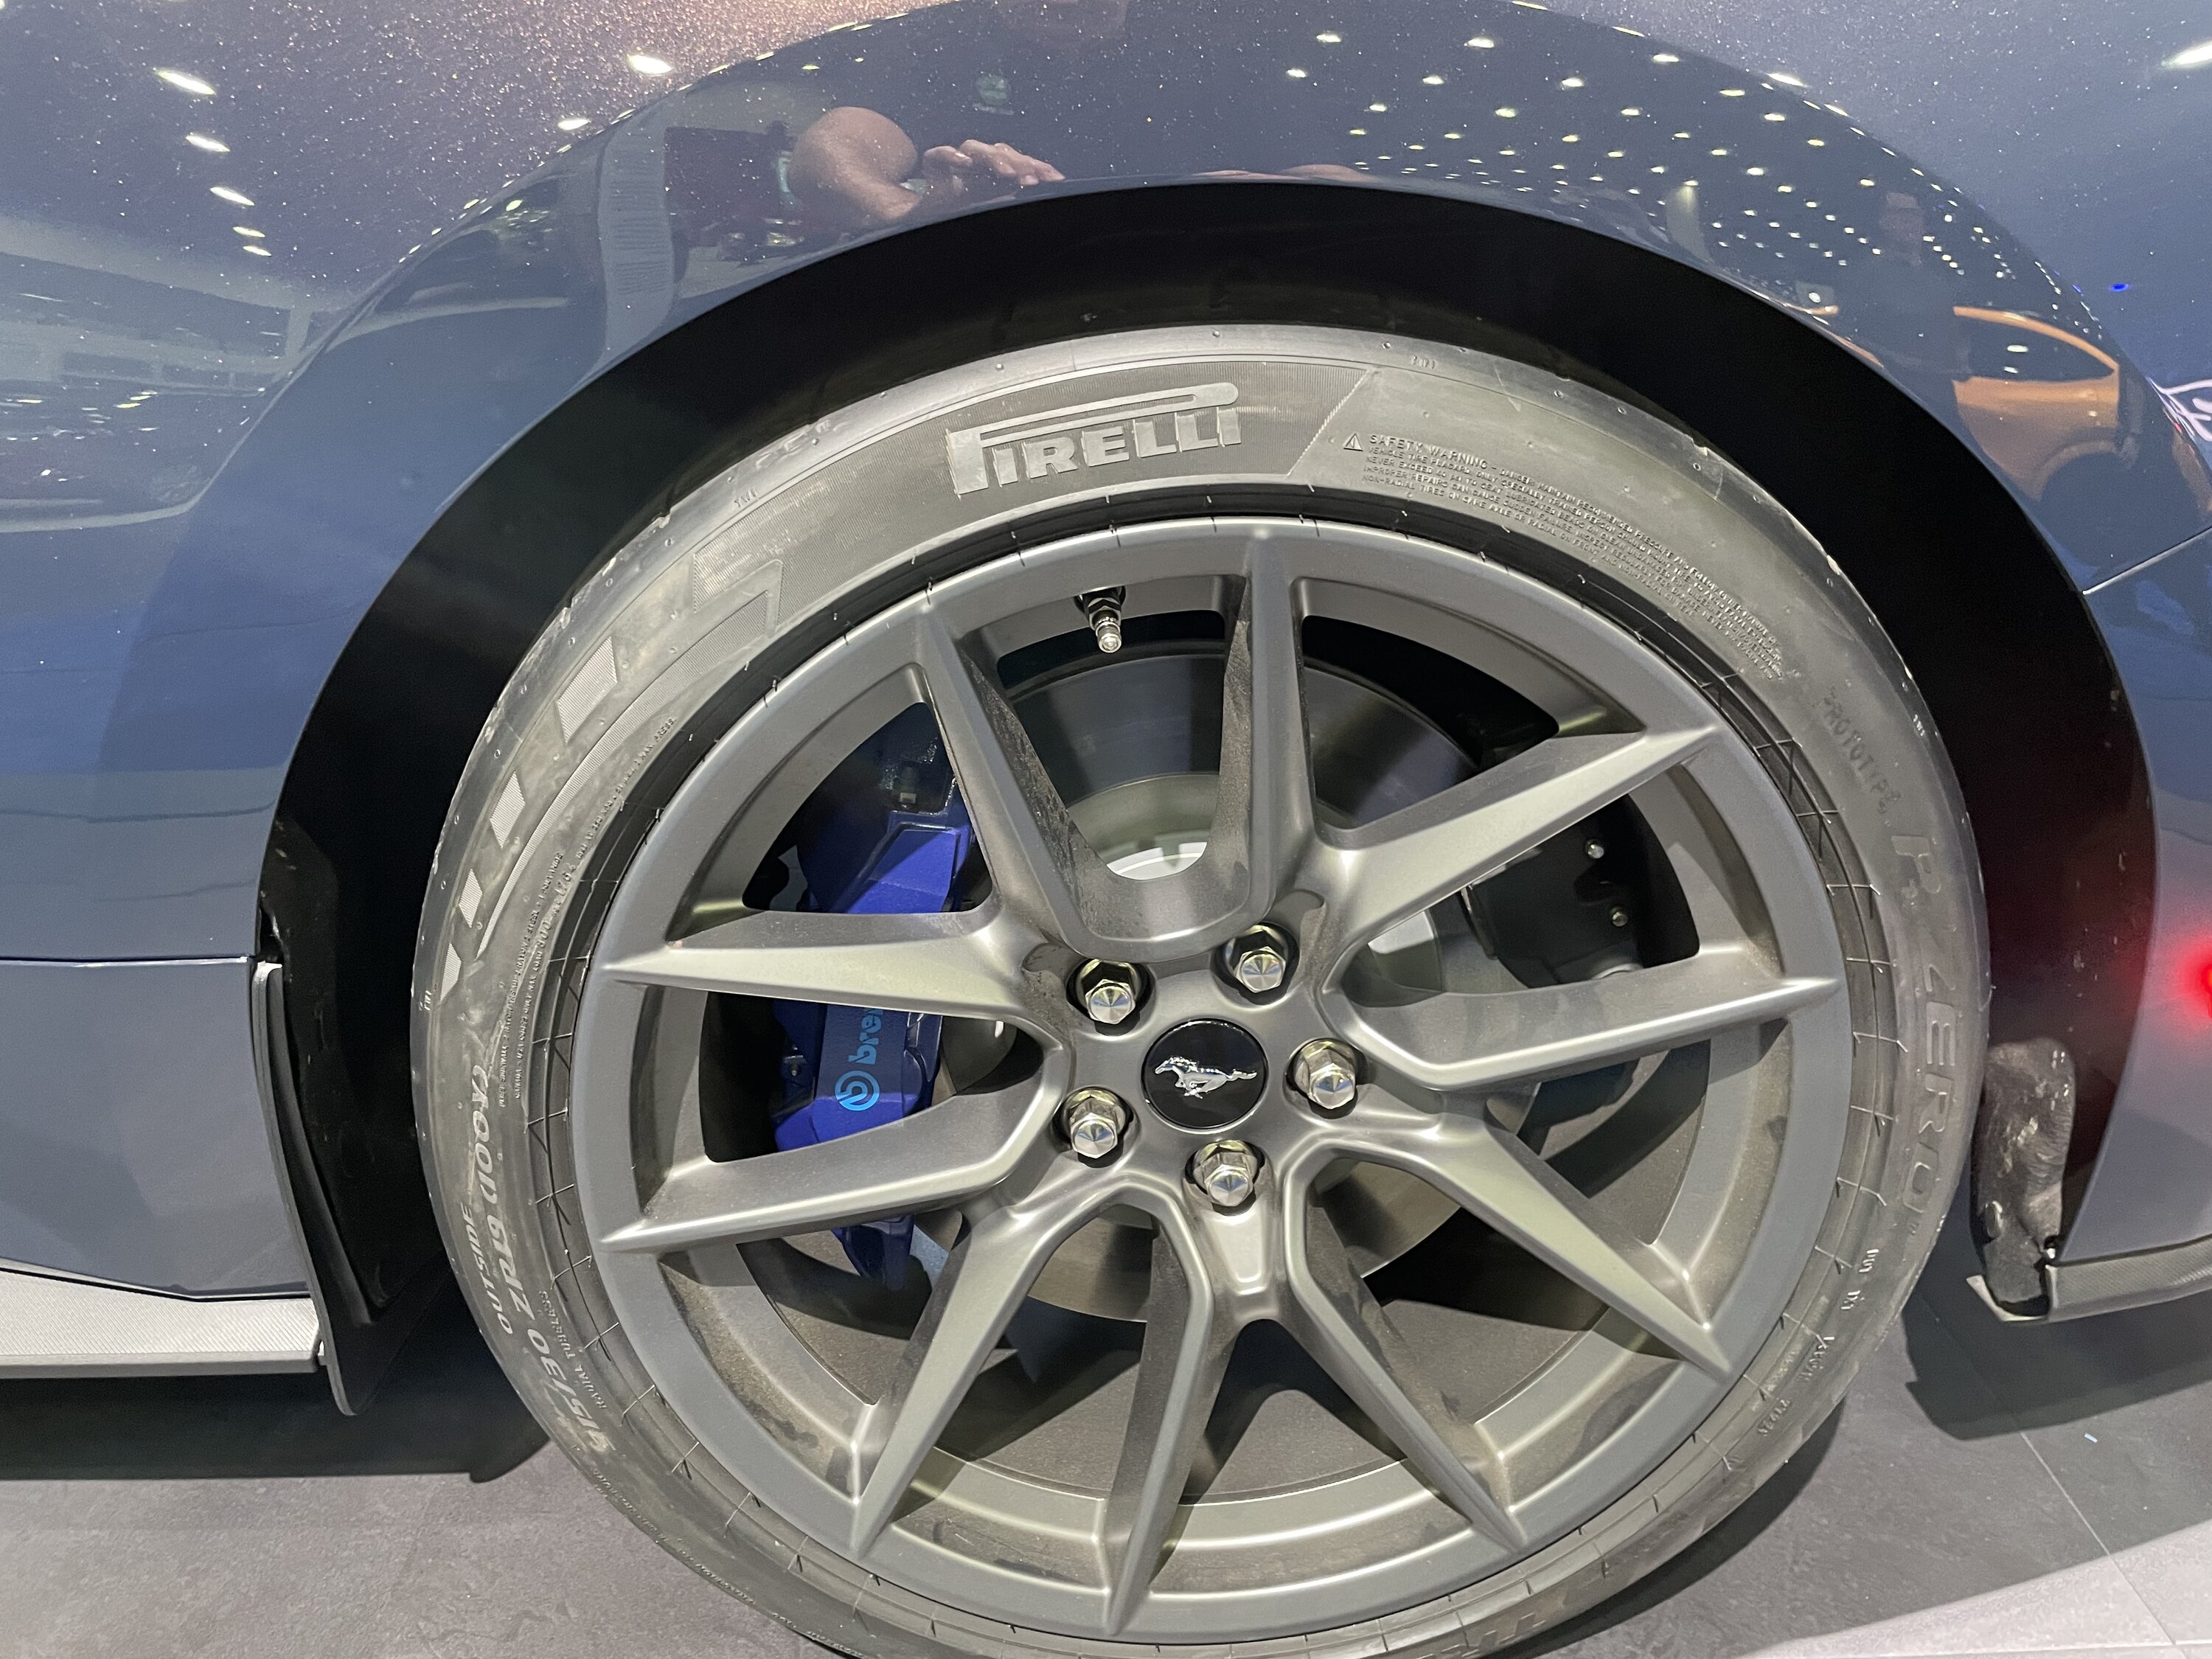 S650 Mustang S650 pics from reveal night and showfloor of 2022 Detroit Auto Show e9db74ce-b91d-4927-b6a0-a4e67408b790-jpeg-